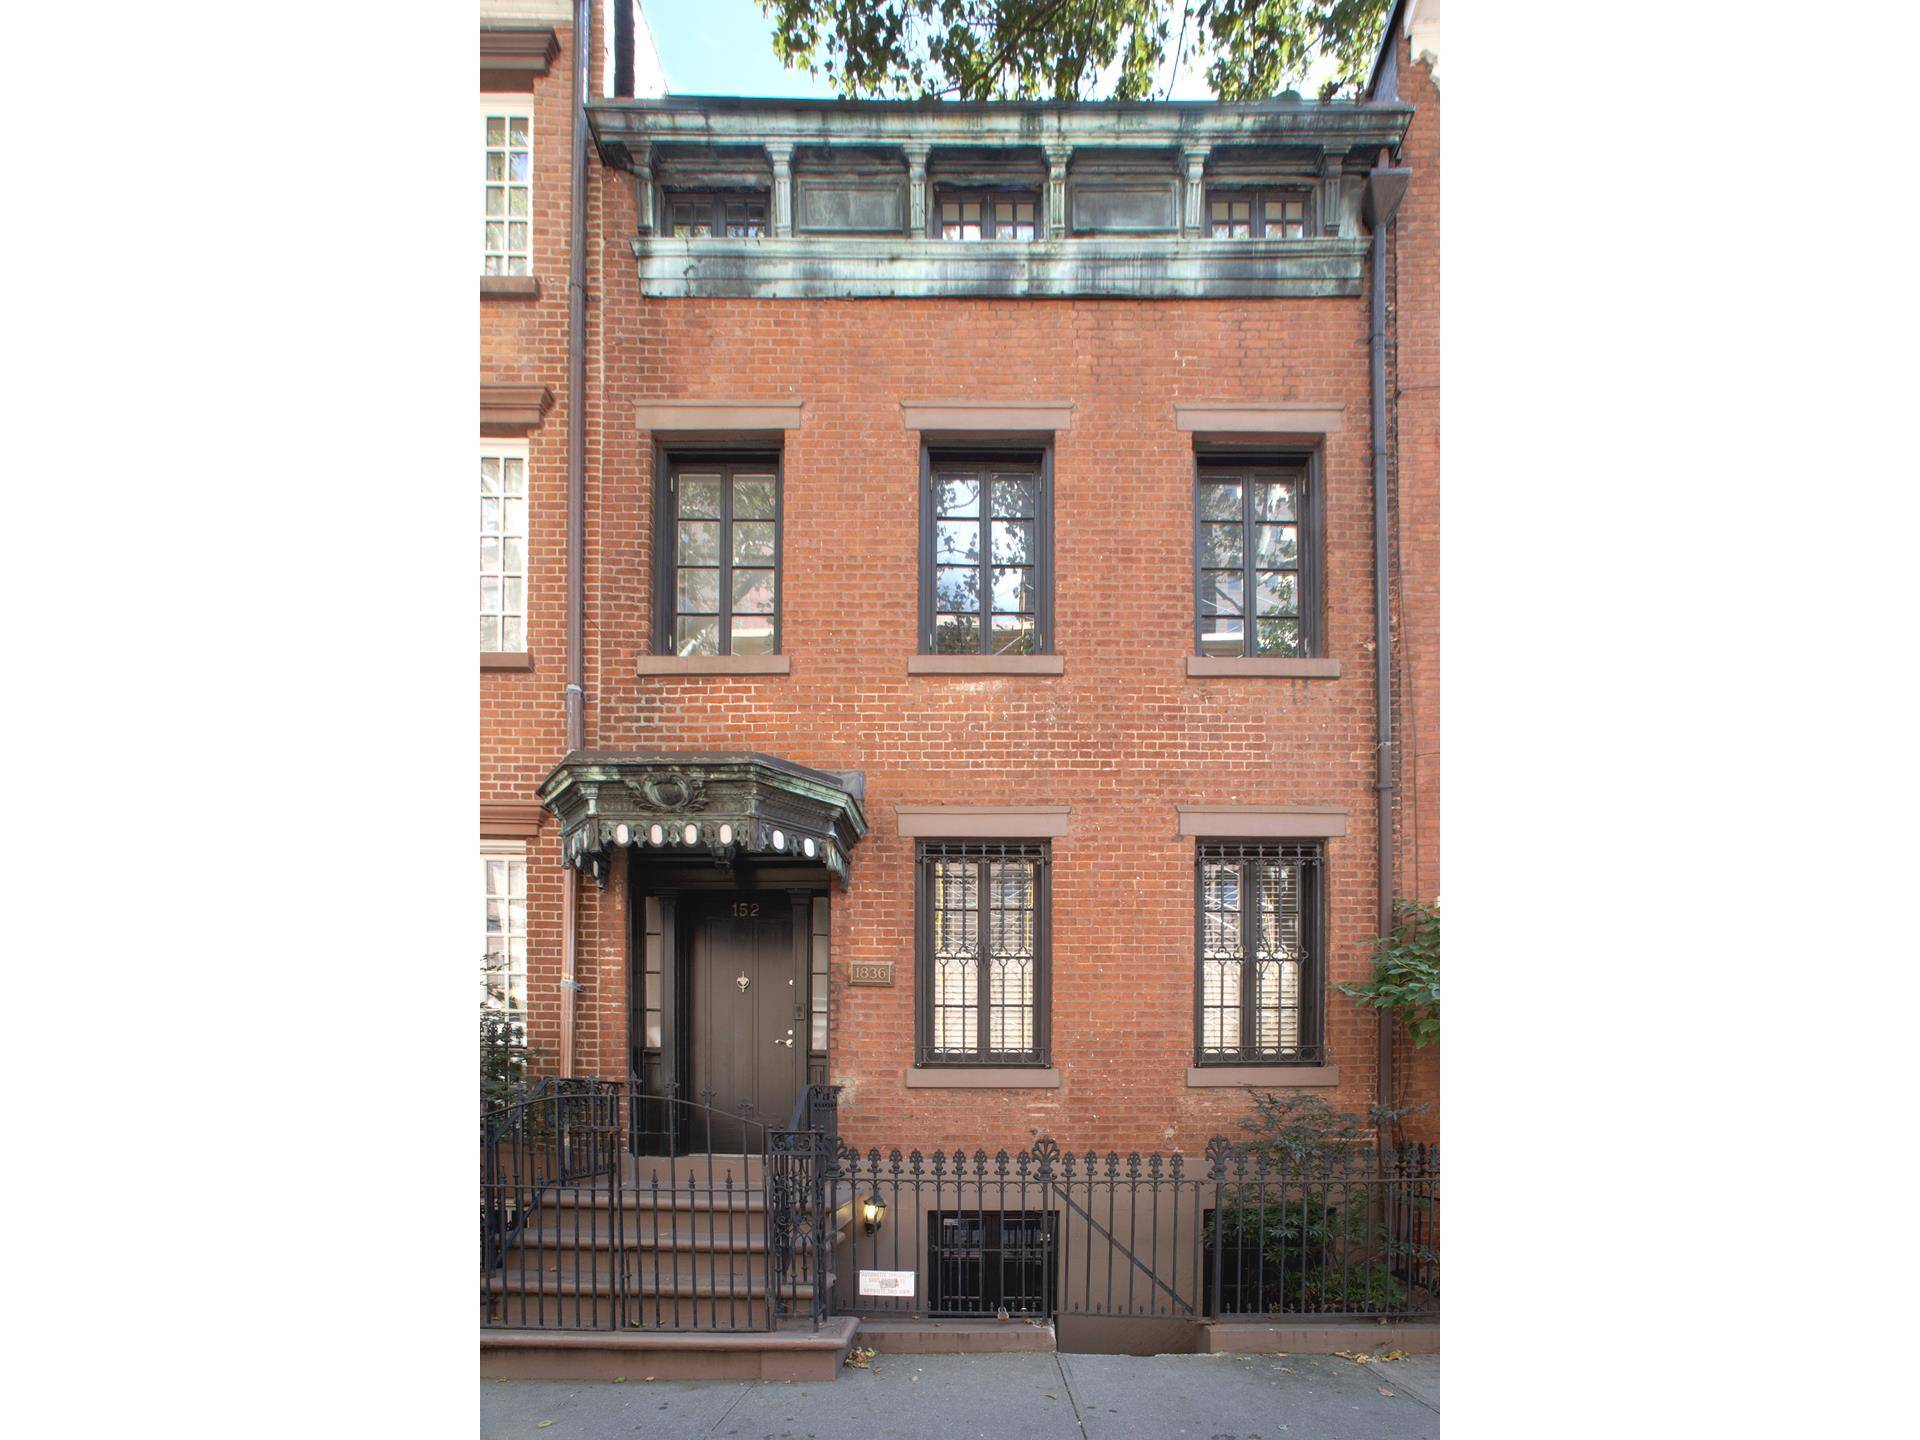 This attractive 18. 75' wide Greek Revival Greenwich Village home is situated on a tranquil tree lined Street across from Greenwich Lane.